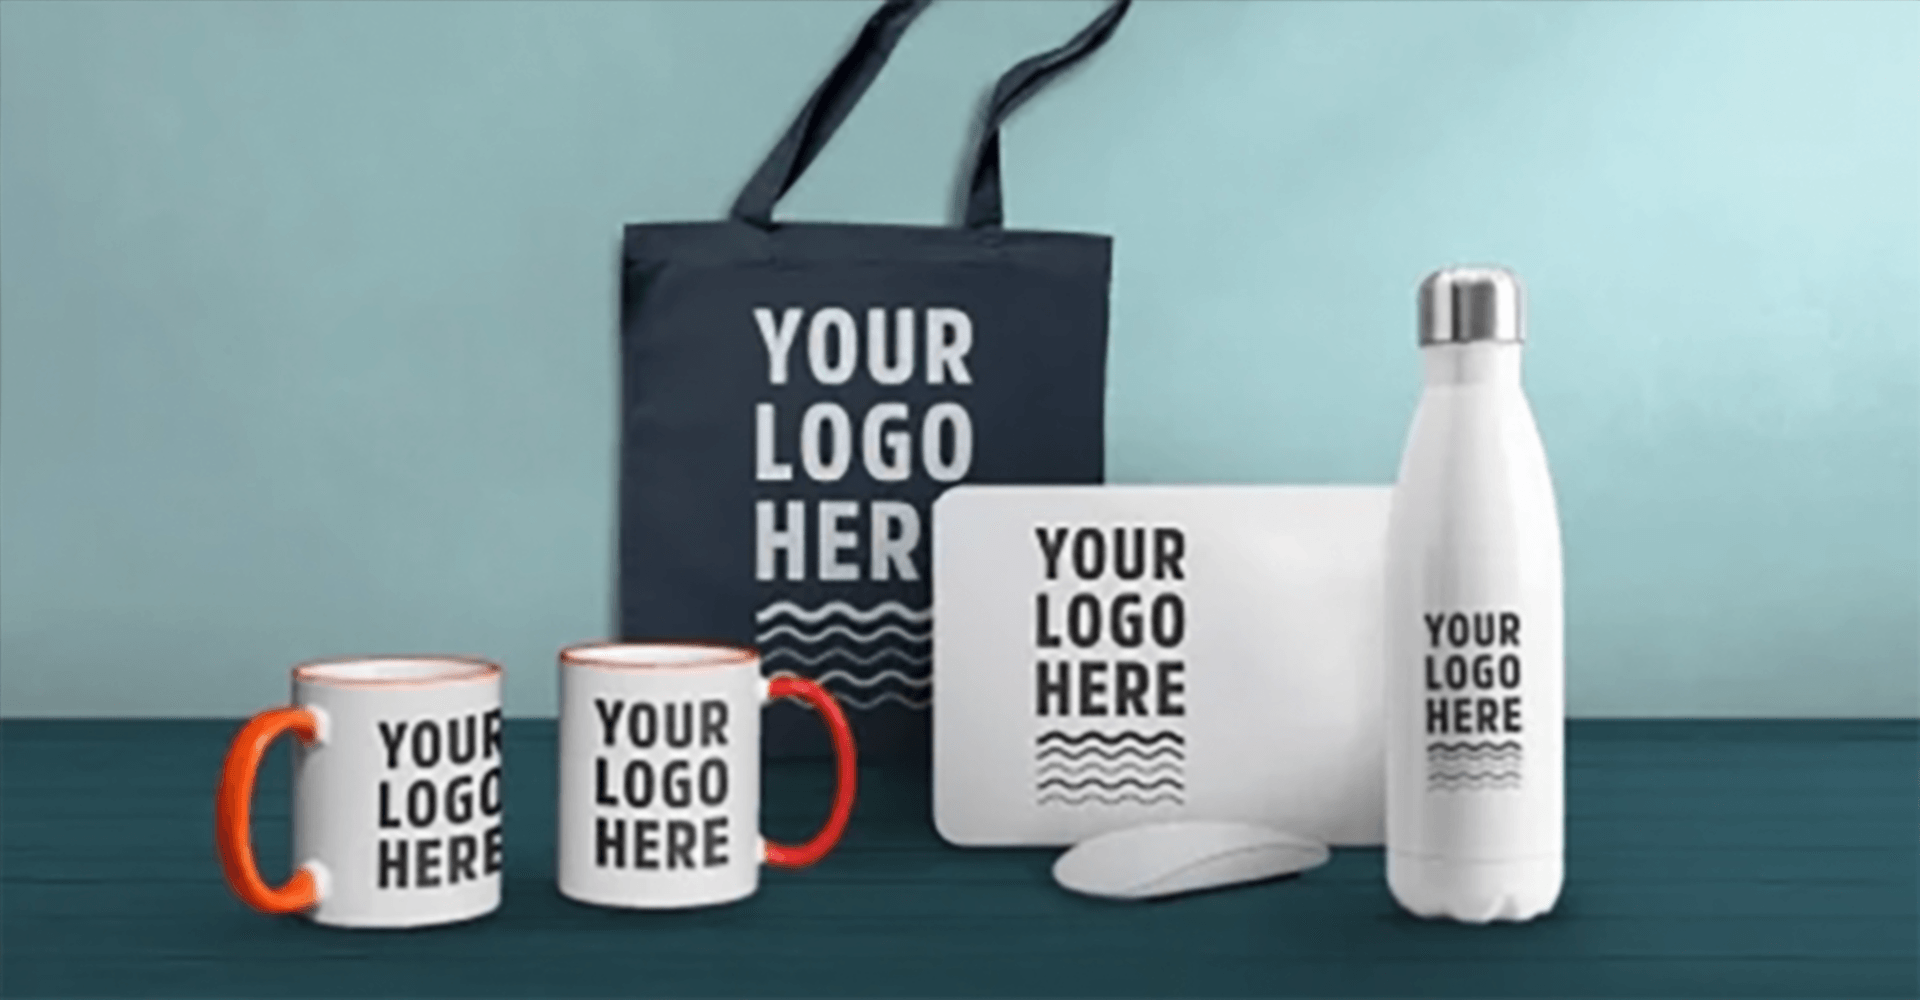 Promotional product facts